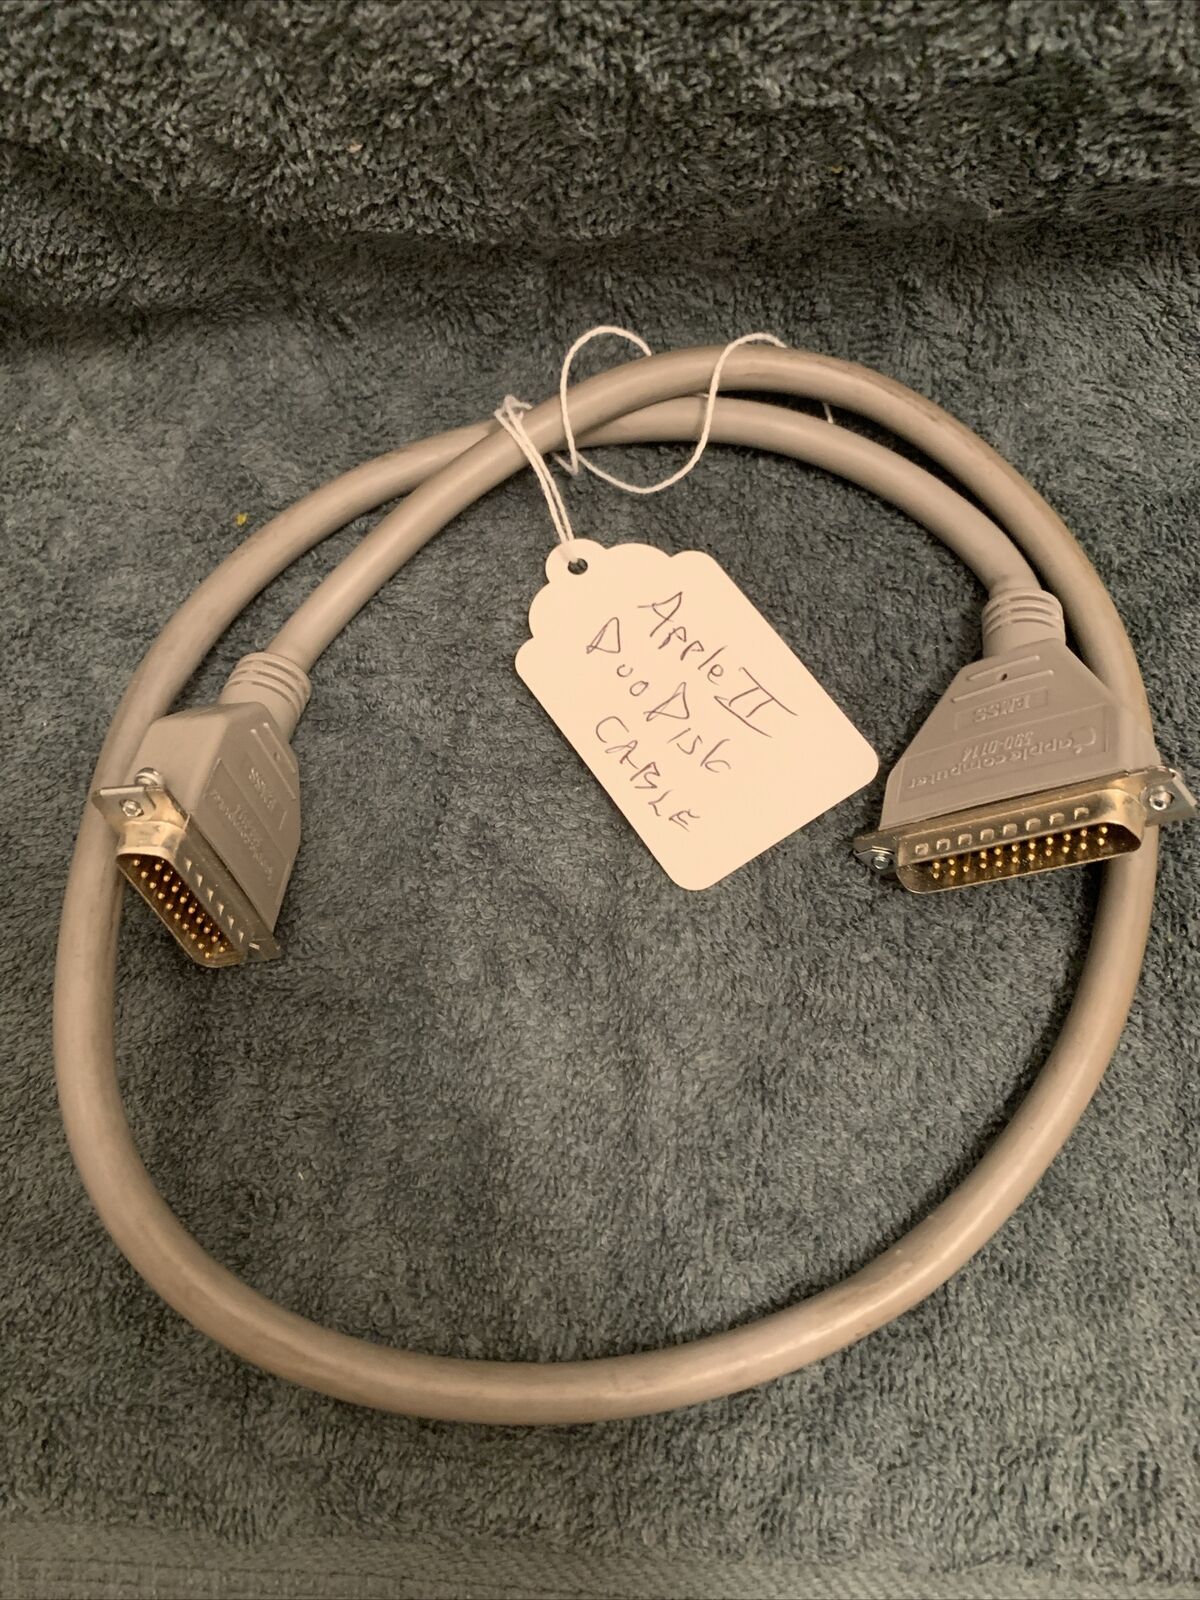 Vintage Apple Brand Cable for Apple ][ Duo Disk Drive